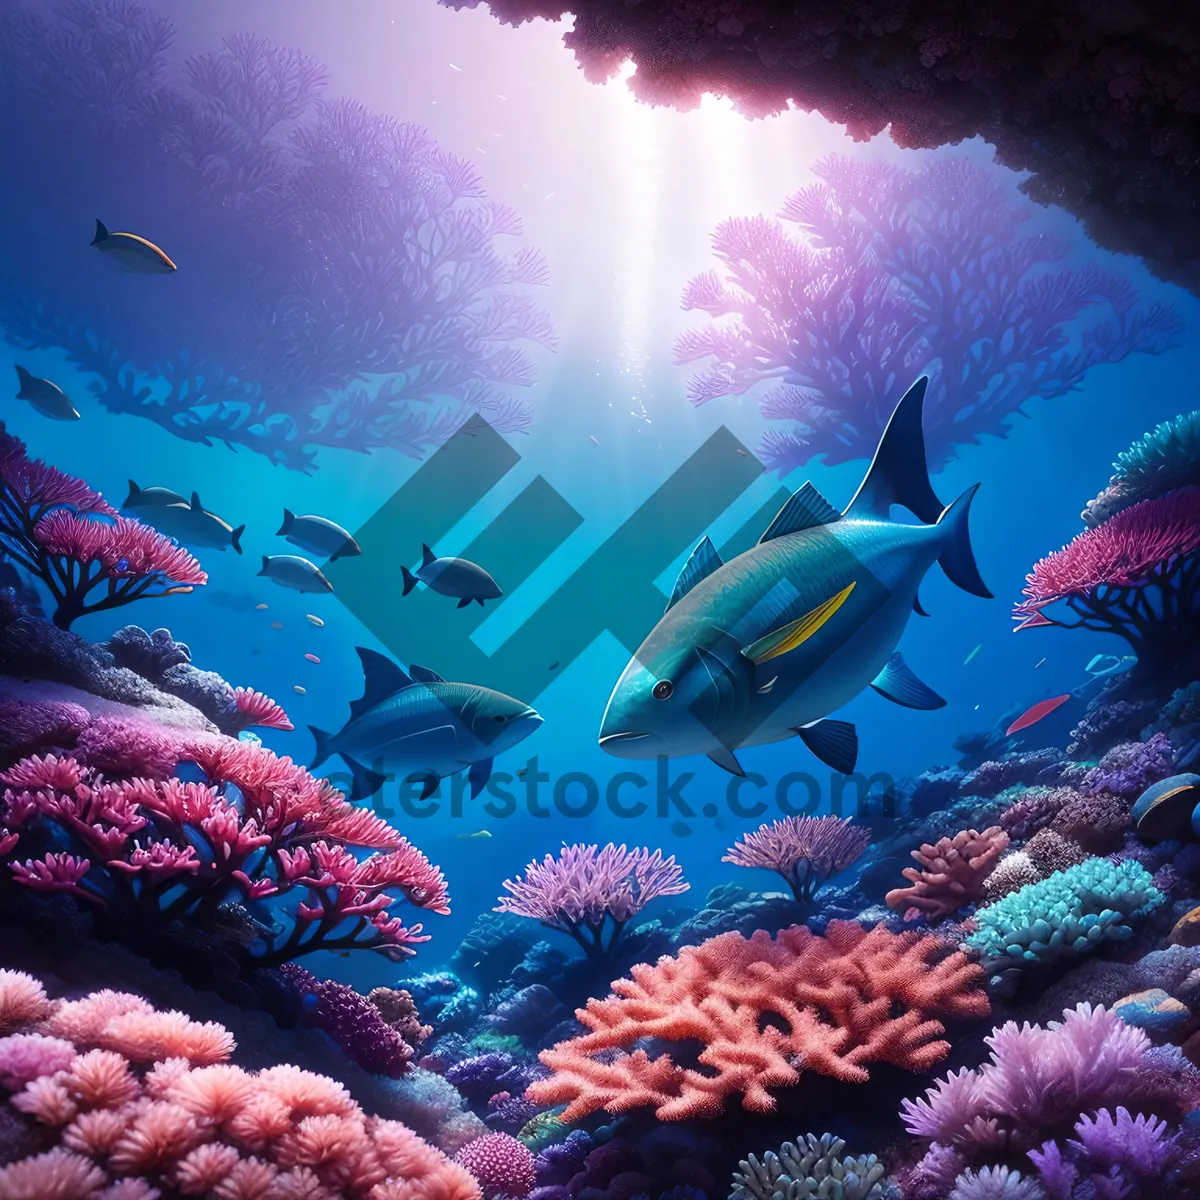 Picture of Vibrant Coral Reef teeming with Marine Life